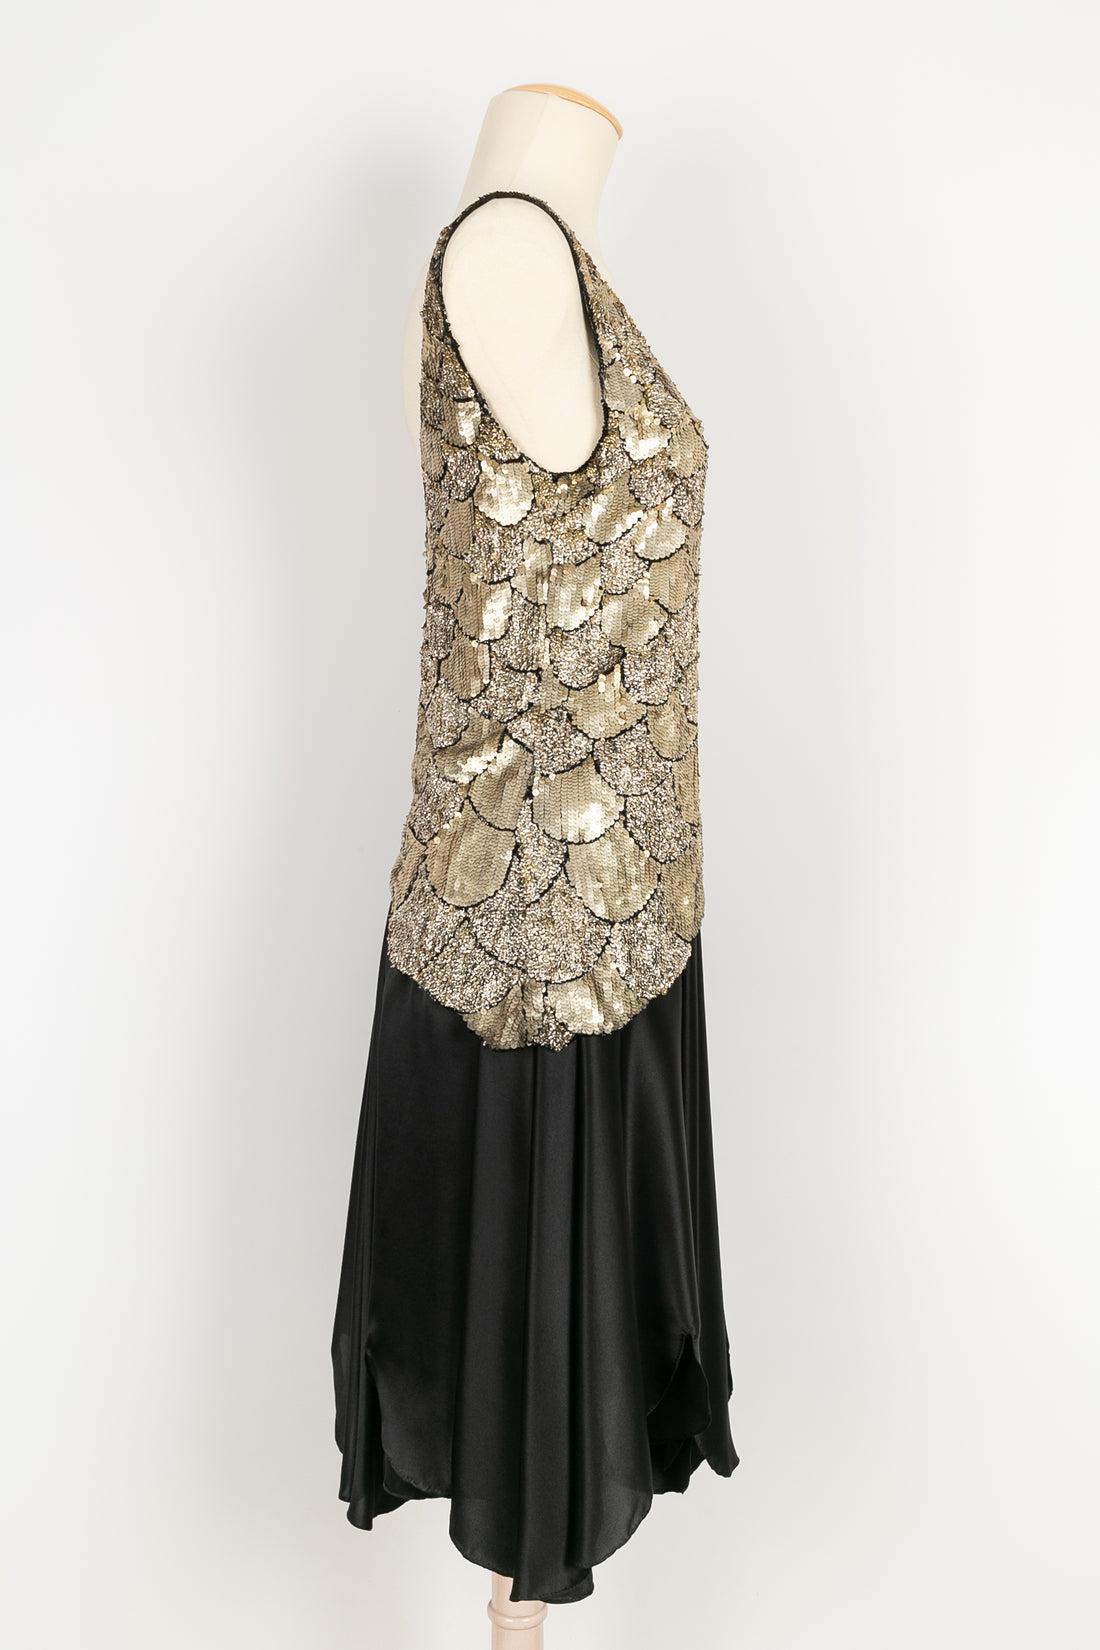 Women's Black Silk with Gold Sequins Dress, 1930's For Sale